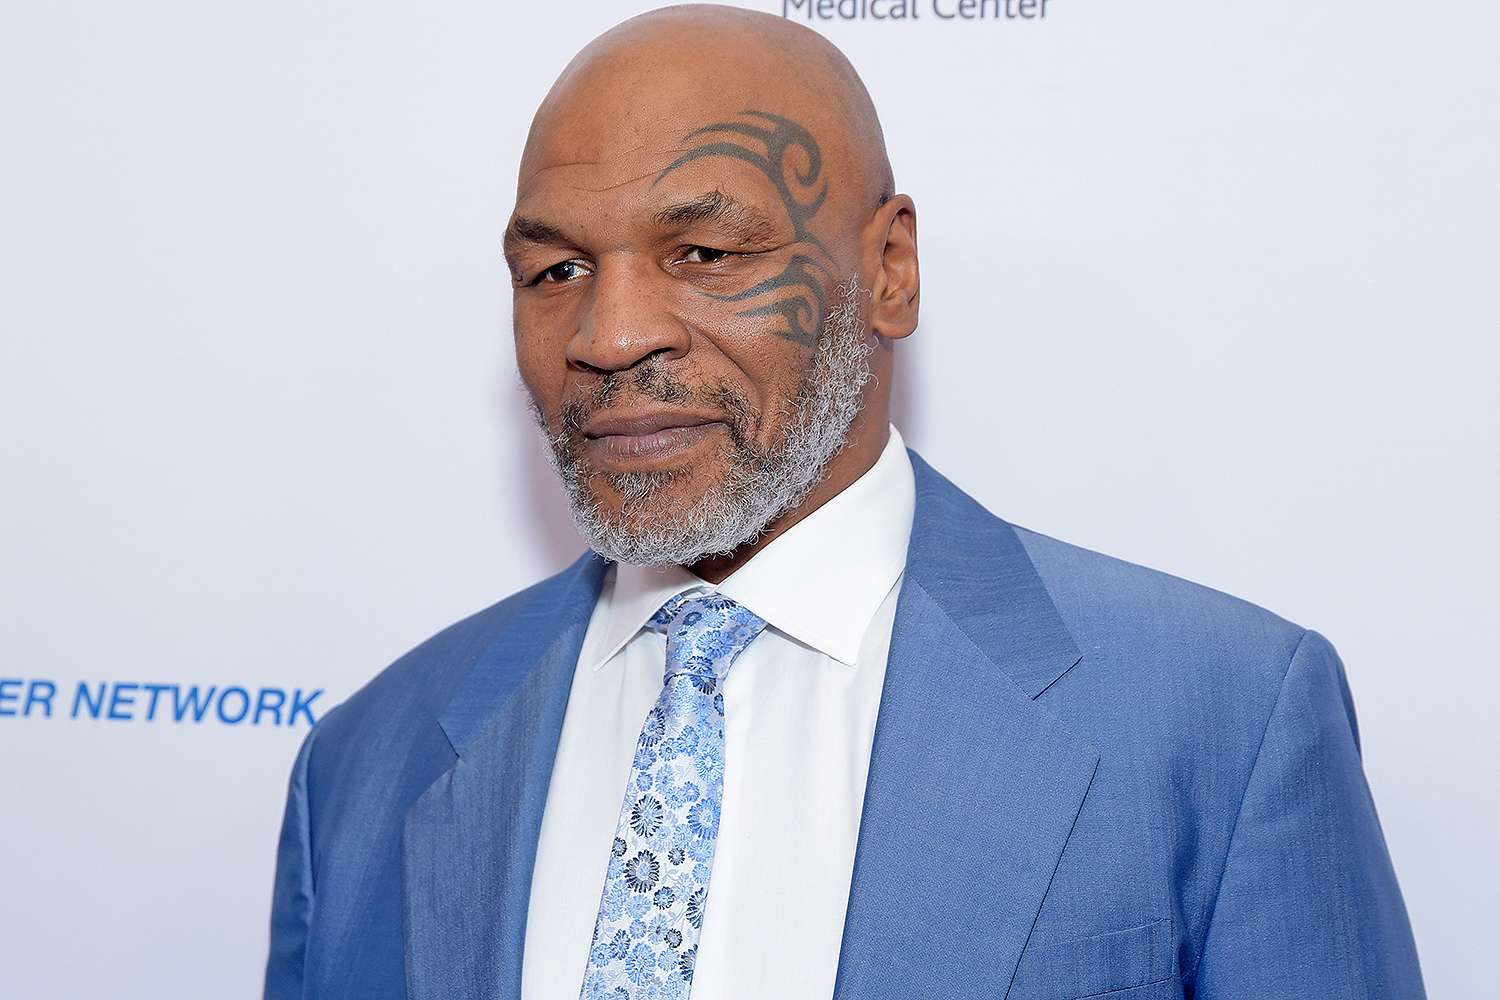 Mike Tyson being sued for raping woman 30 years ago; victim wants $5M